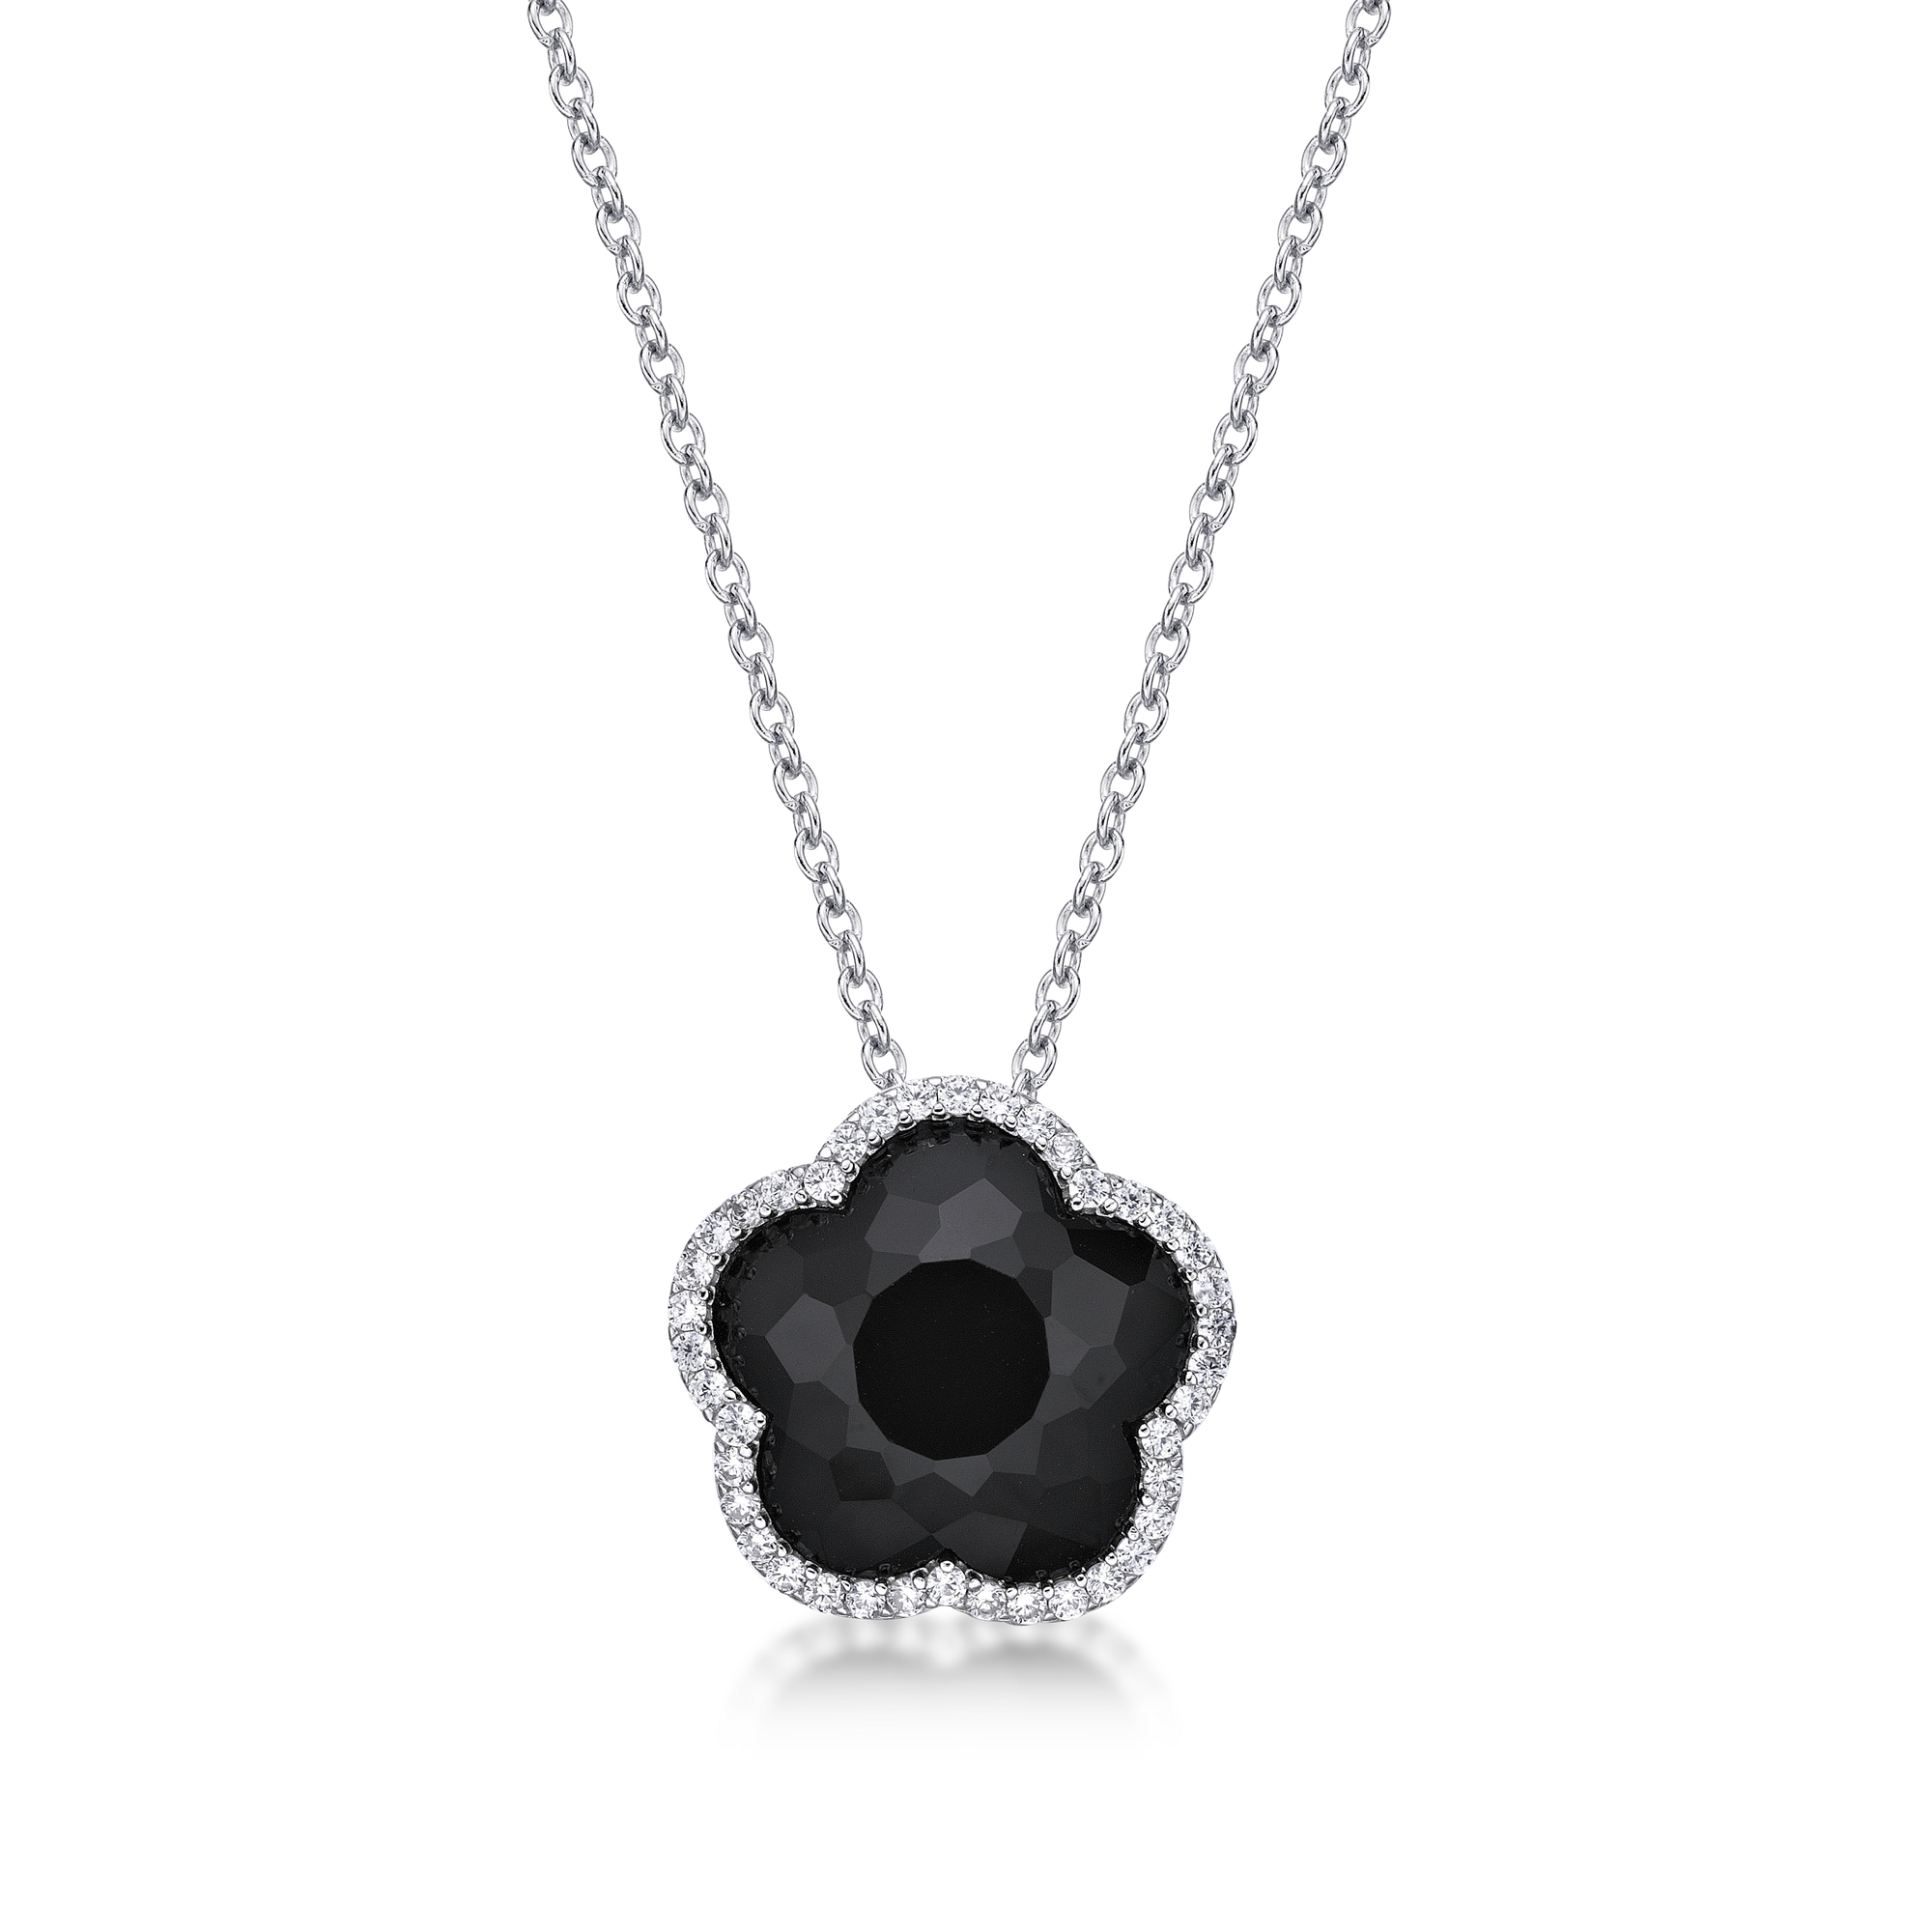 Lavari Jewelers Women’s Black Onyx Five Petal Flower Pendant Necklace with Spring Ring, 925 Sterling Silver, Cubic Zirconia, 18 Inch Chain